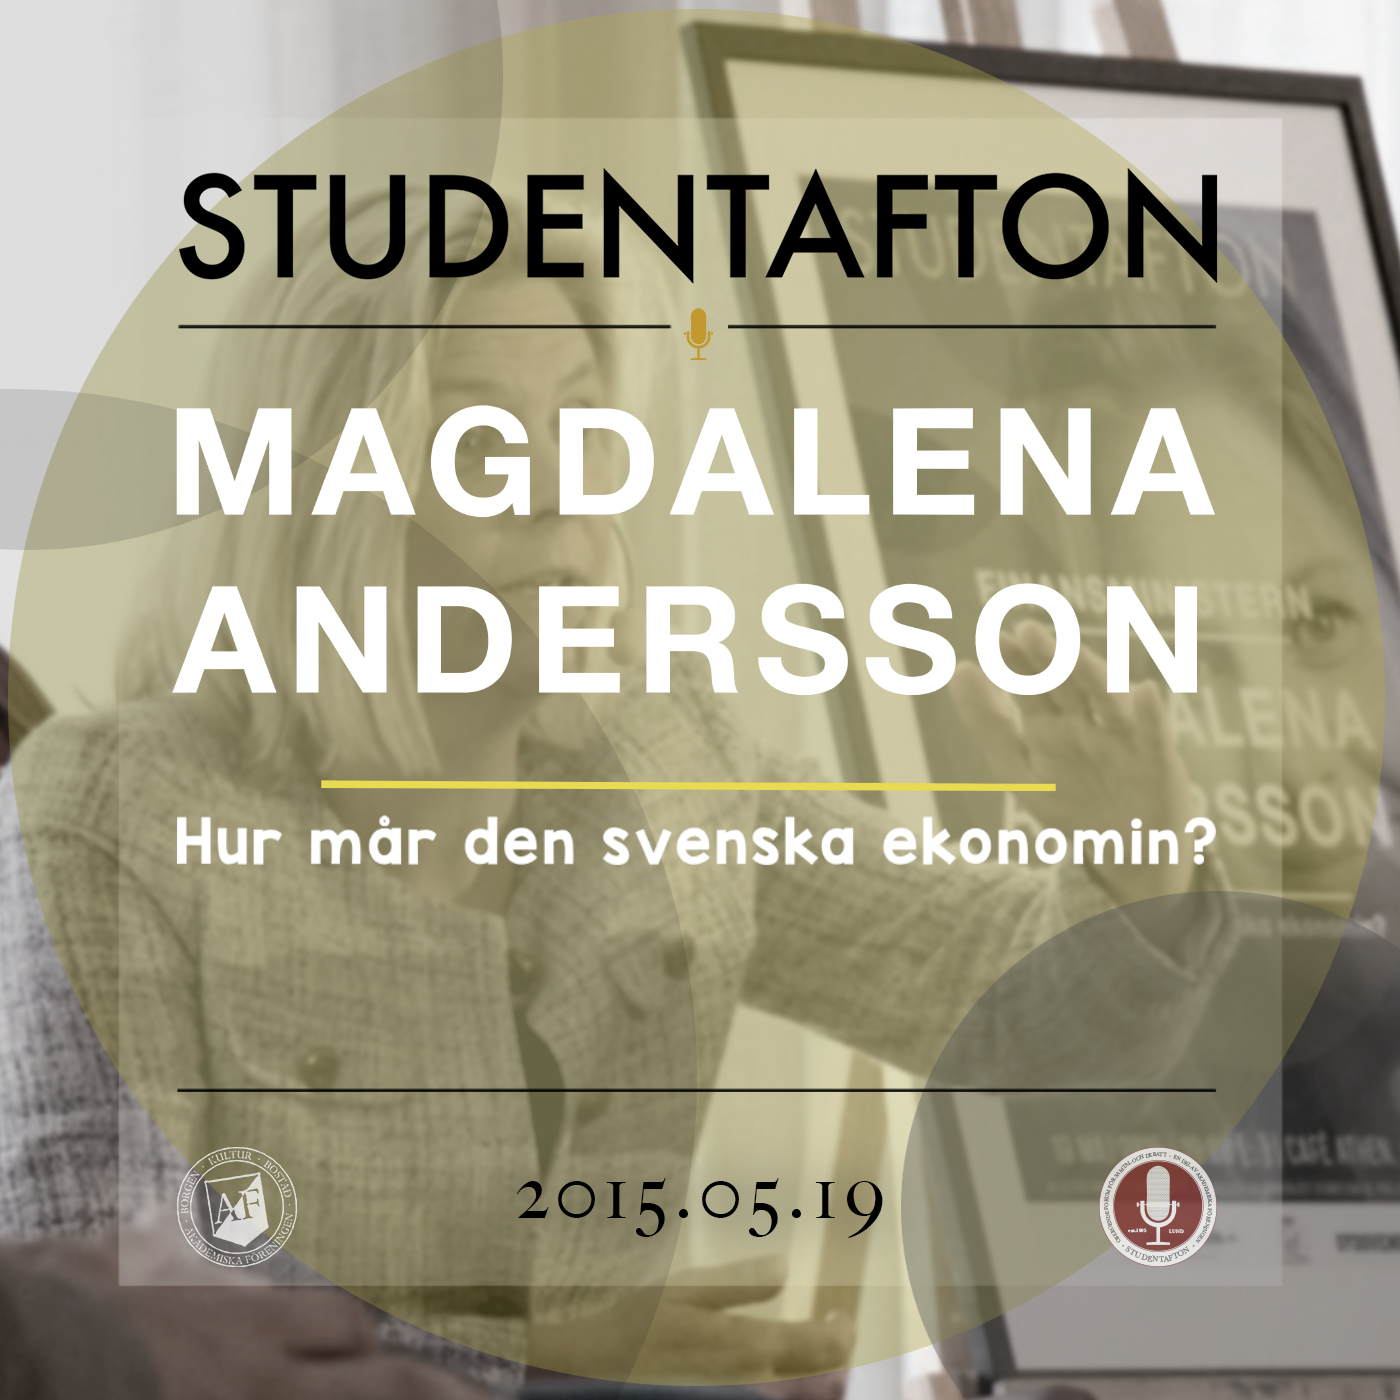 13. Magdalena Andersson